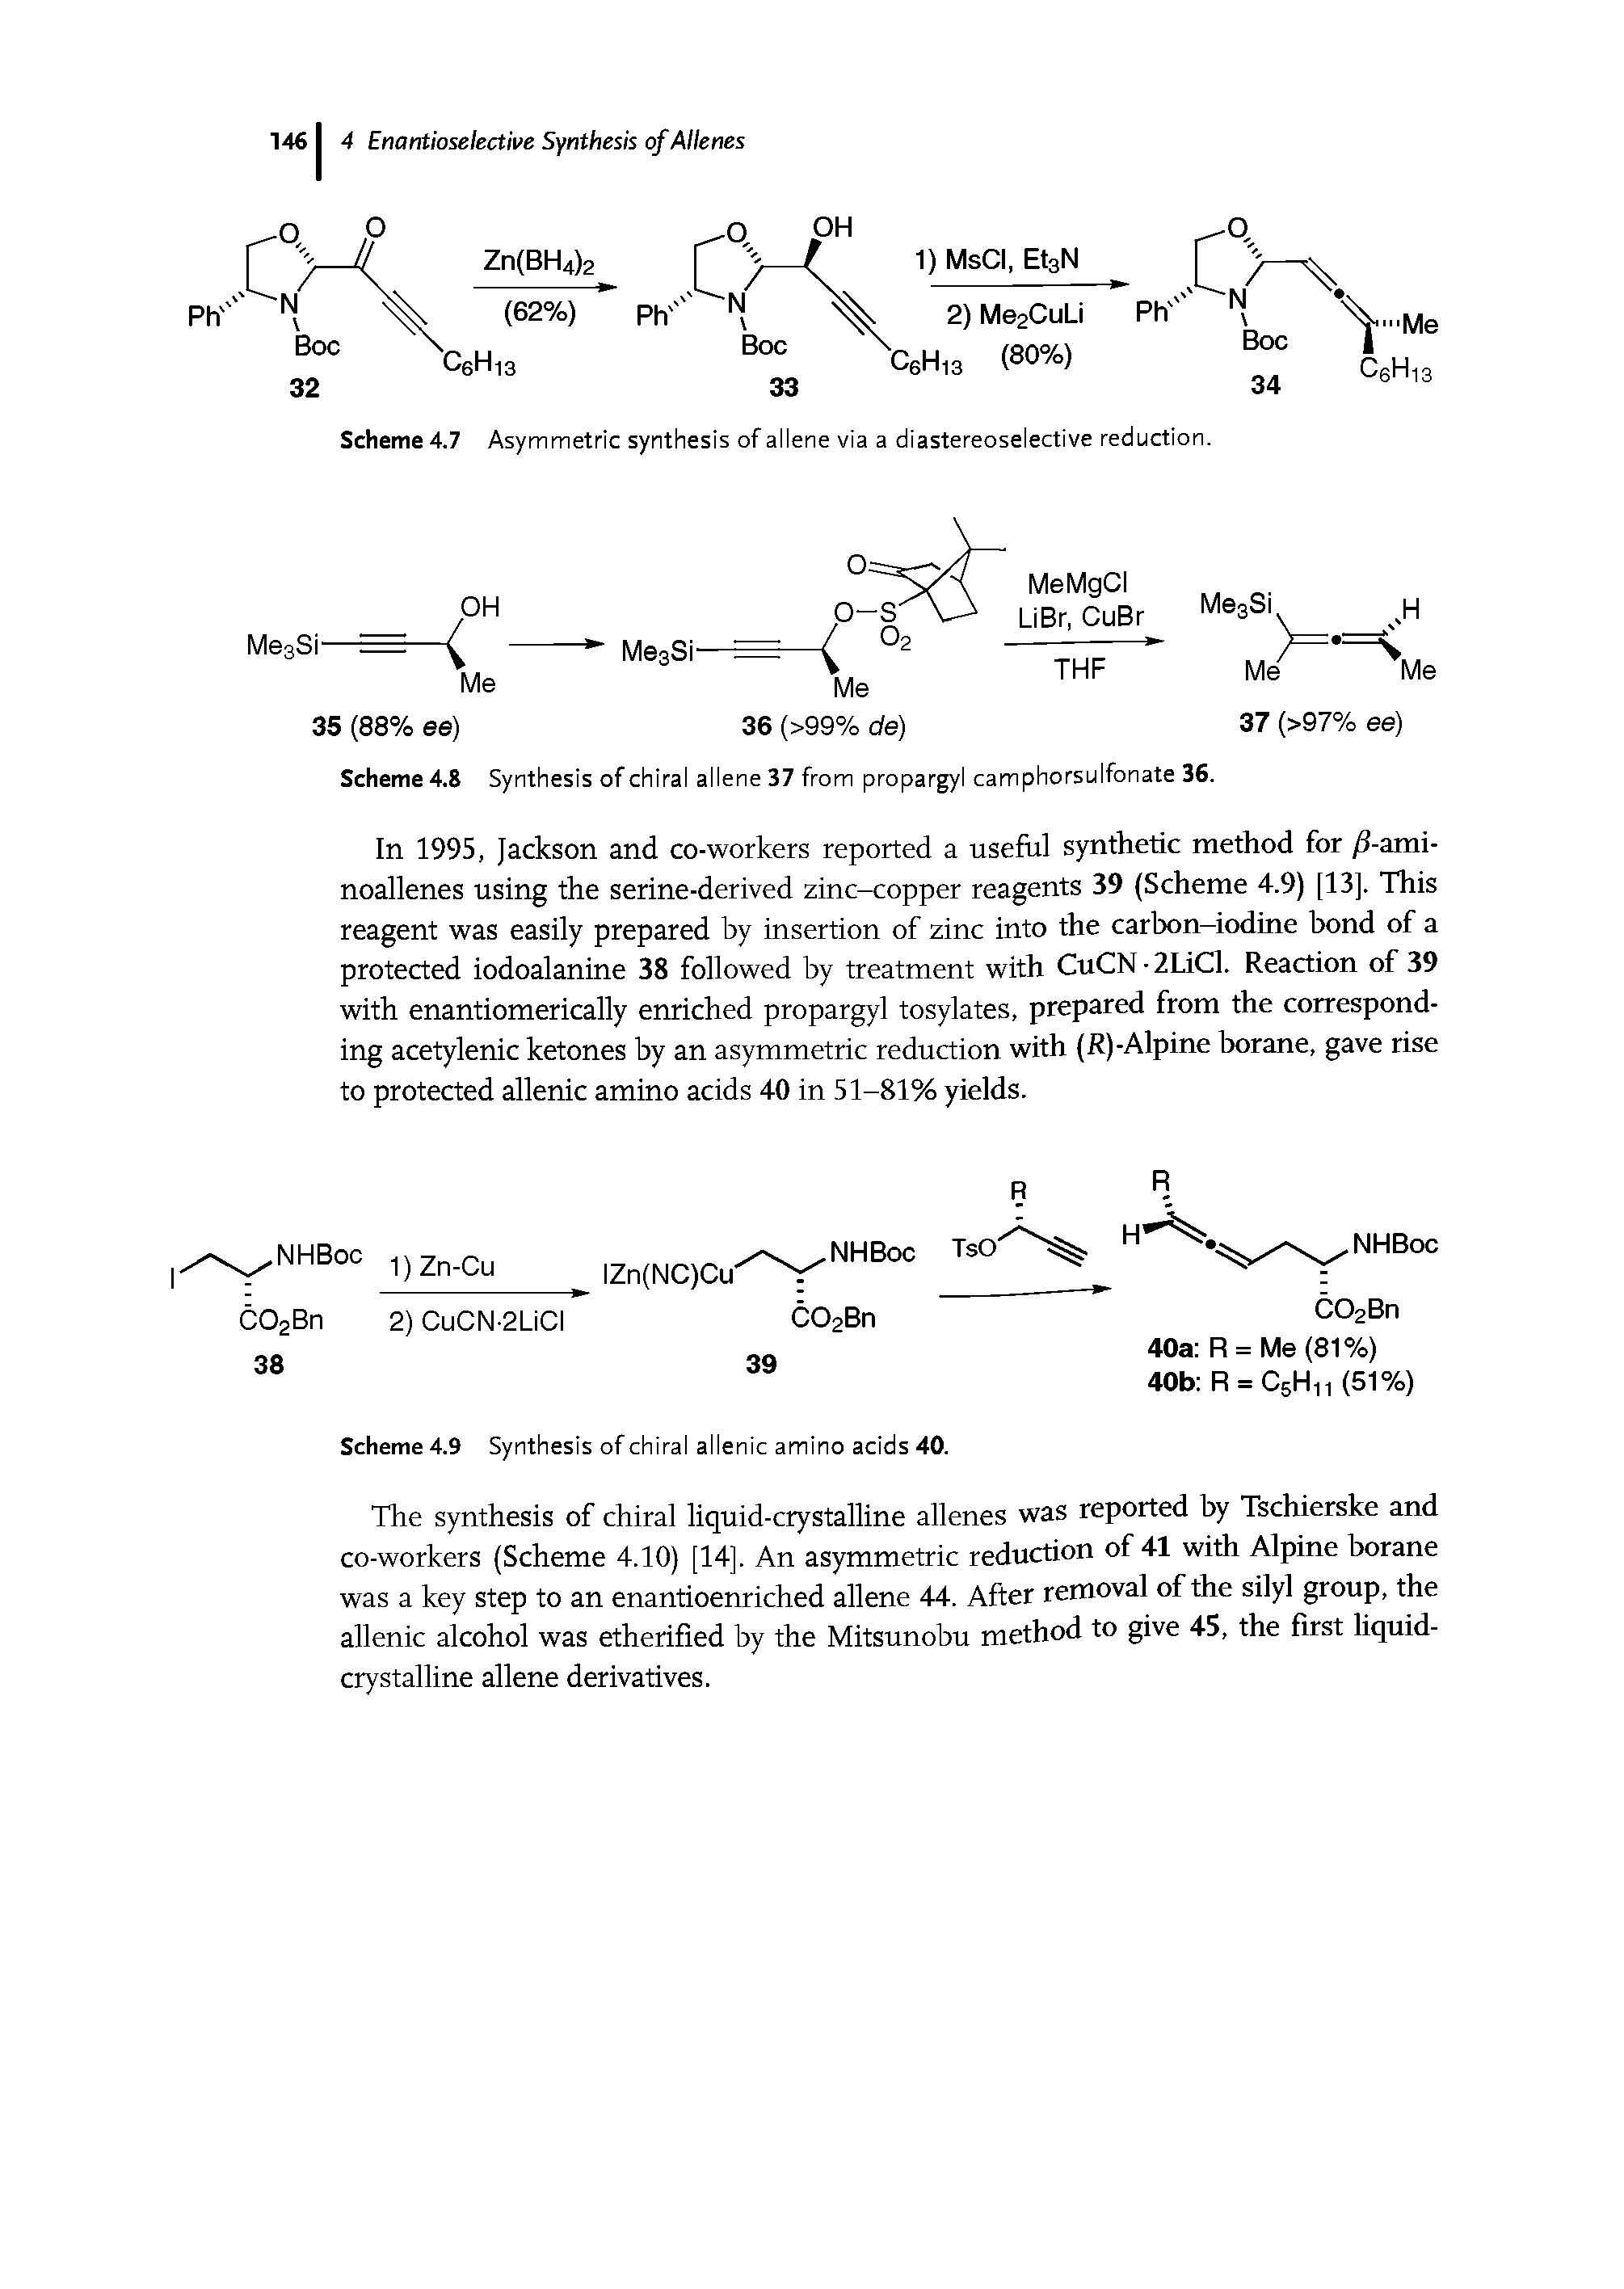 Scheme 4.8 Synthesis of chiral allene 37 from propargyl camphorsulfonate 36.